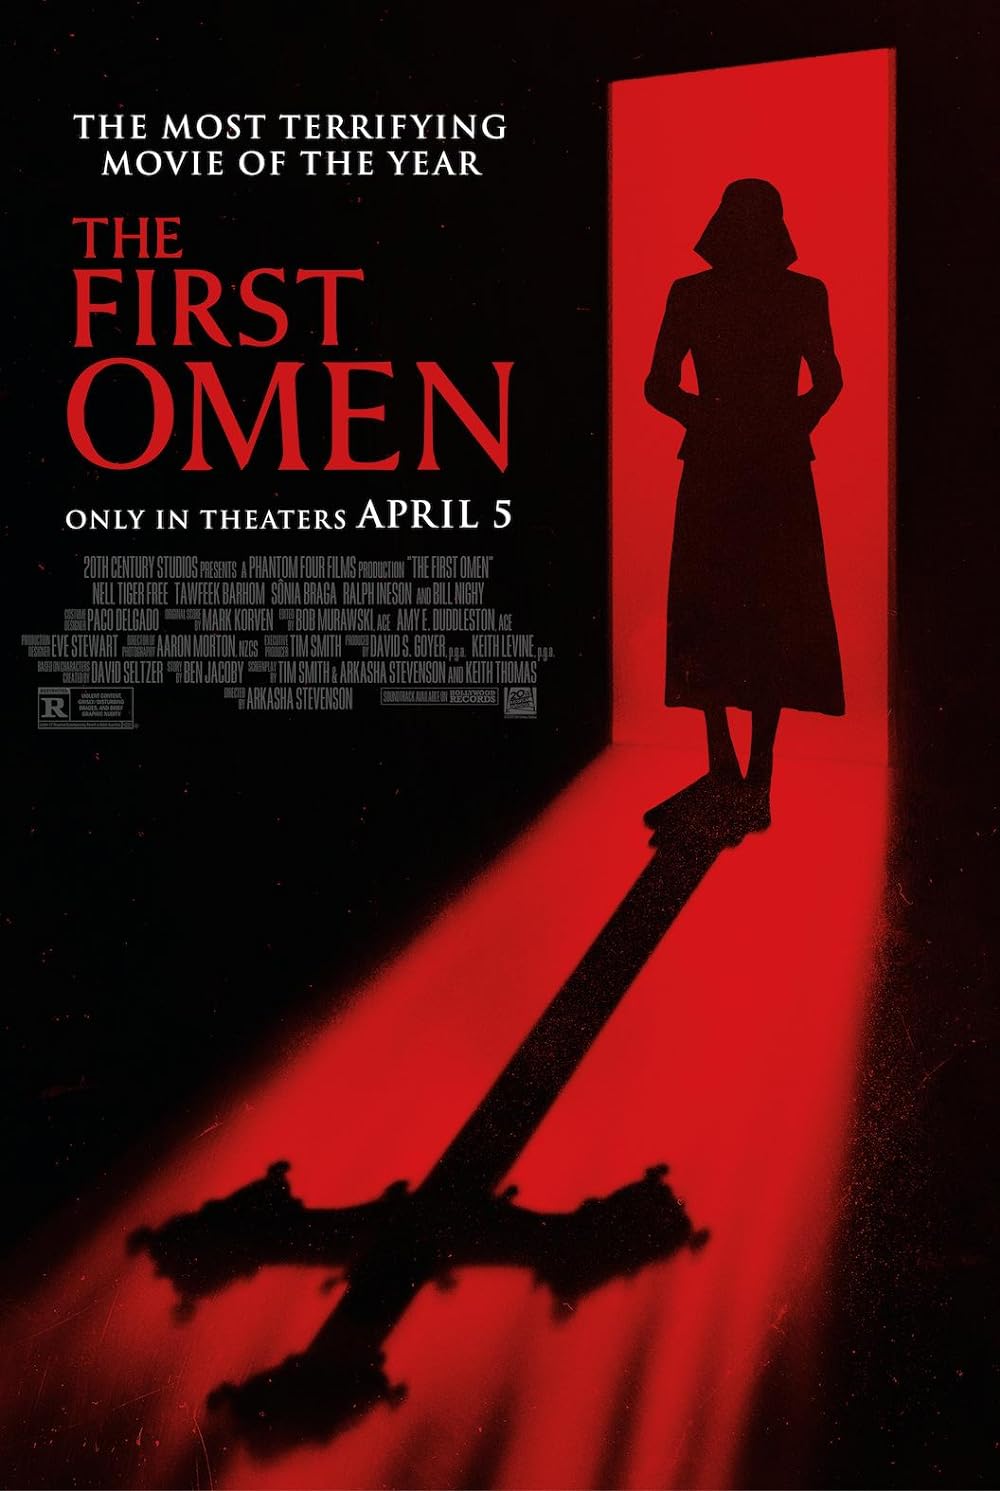 THE FIRST OMEN